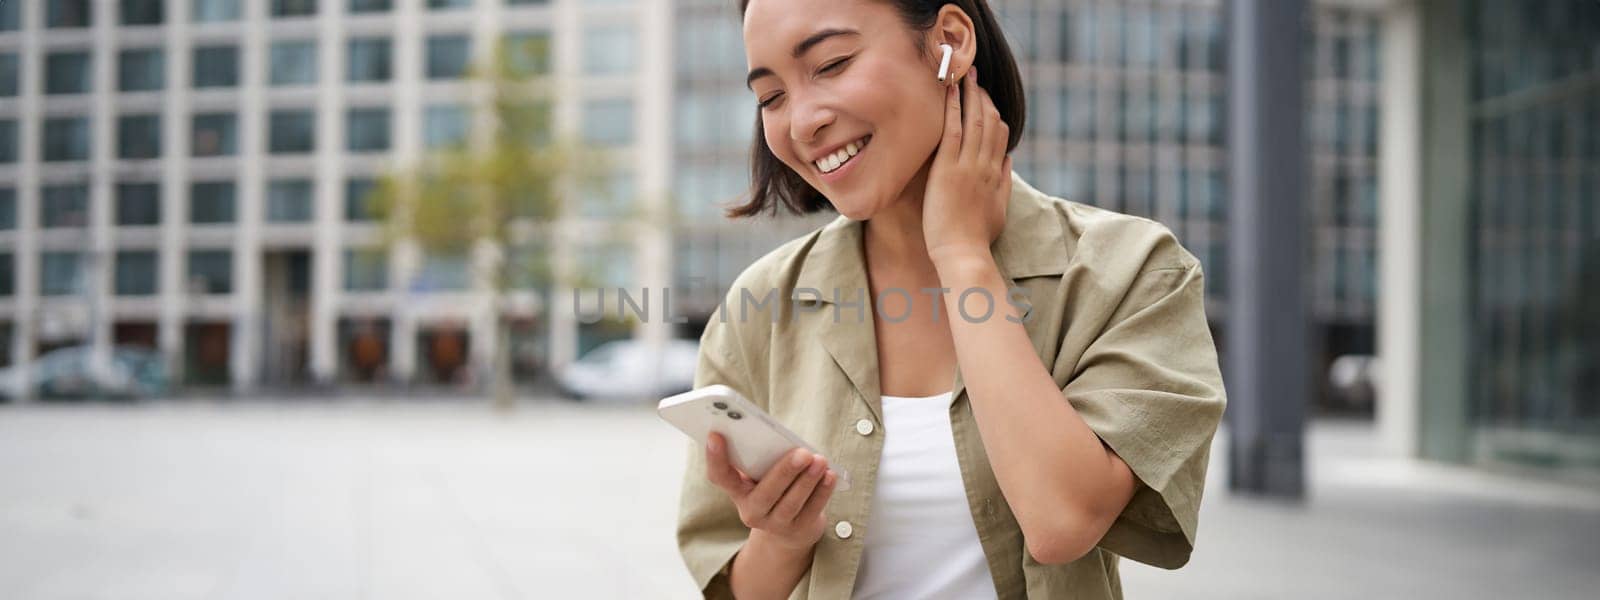 Smiling asian girl listens music in wireless headphones, looks at her phone, choosing music or podcast. Young woman calling someone, using headphones.